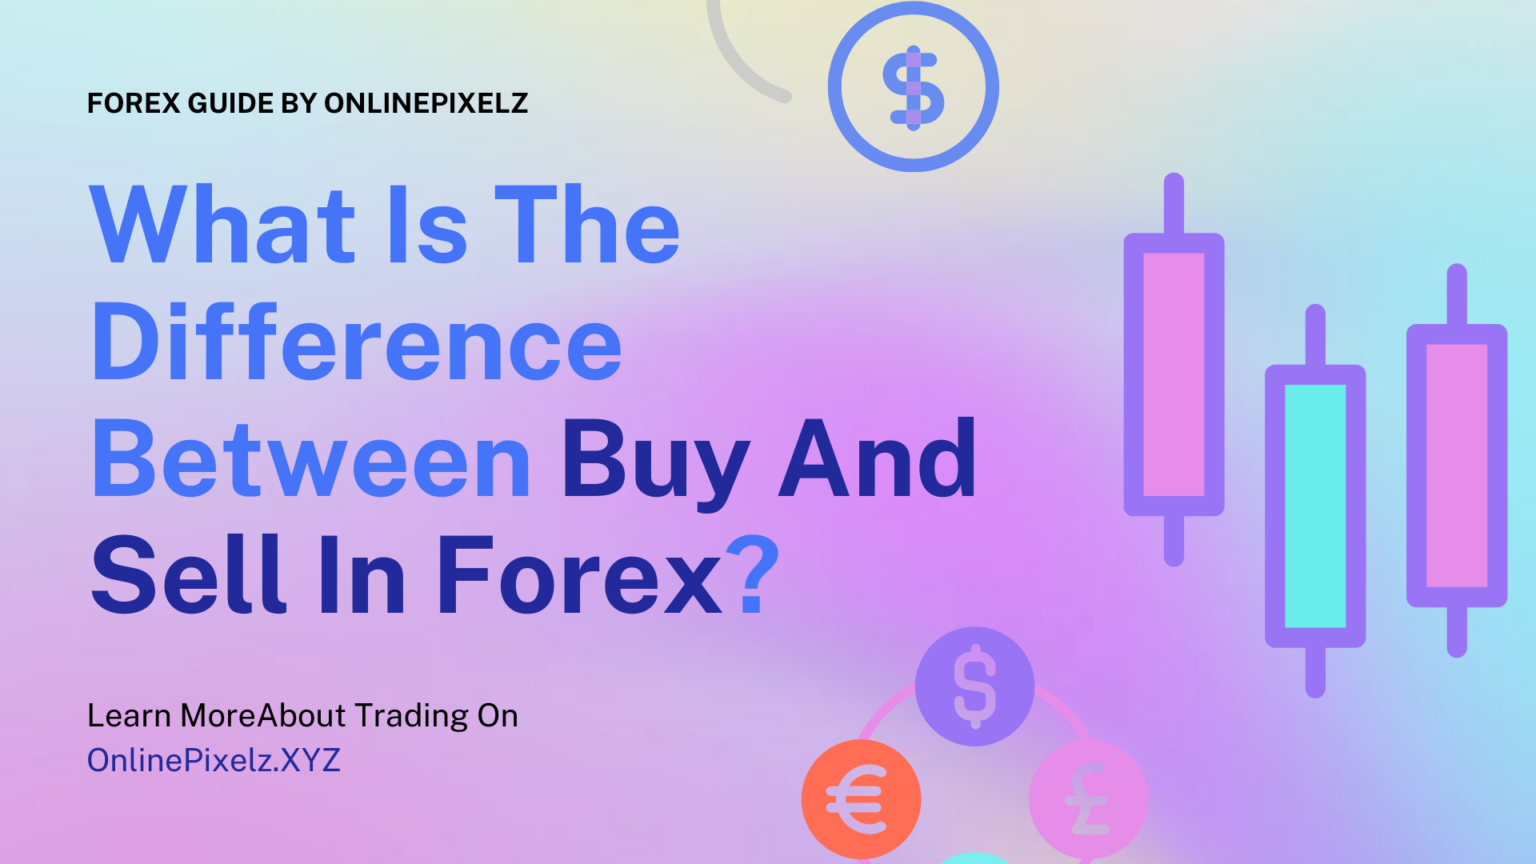 What Is The Difference Between Buy And Sell In Forex